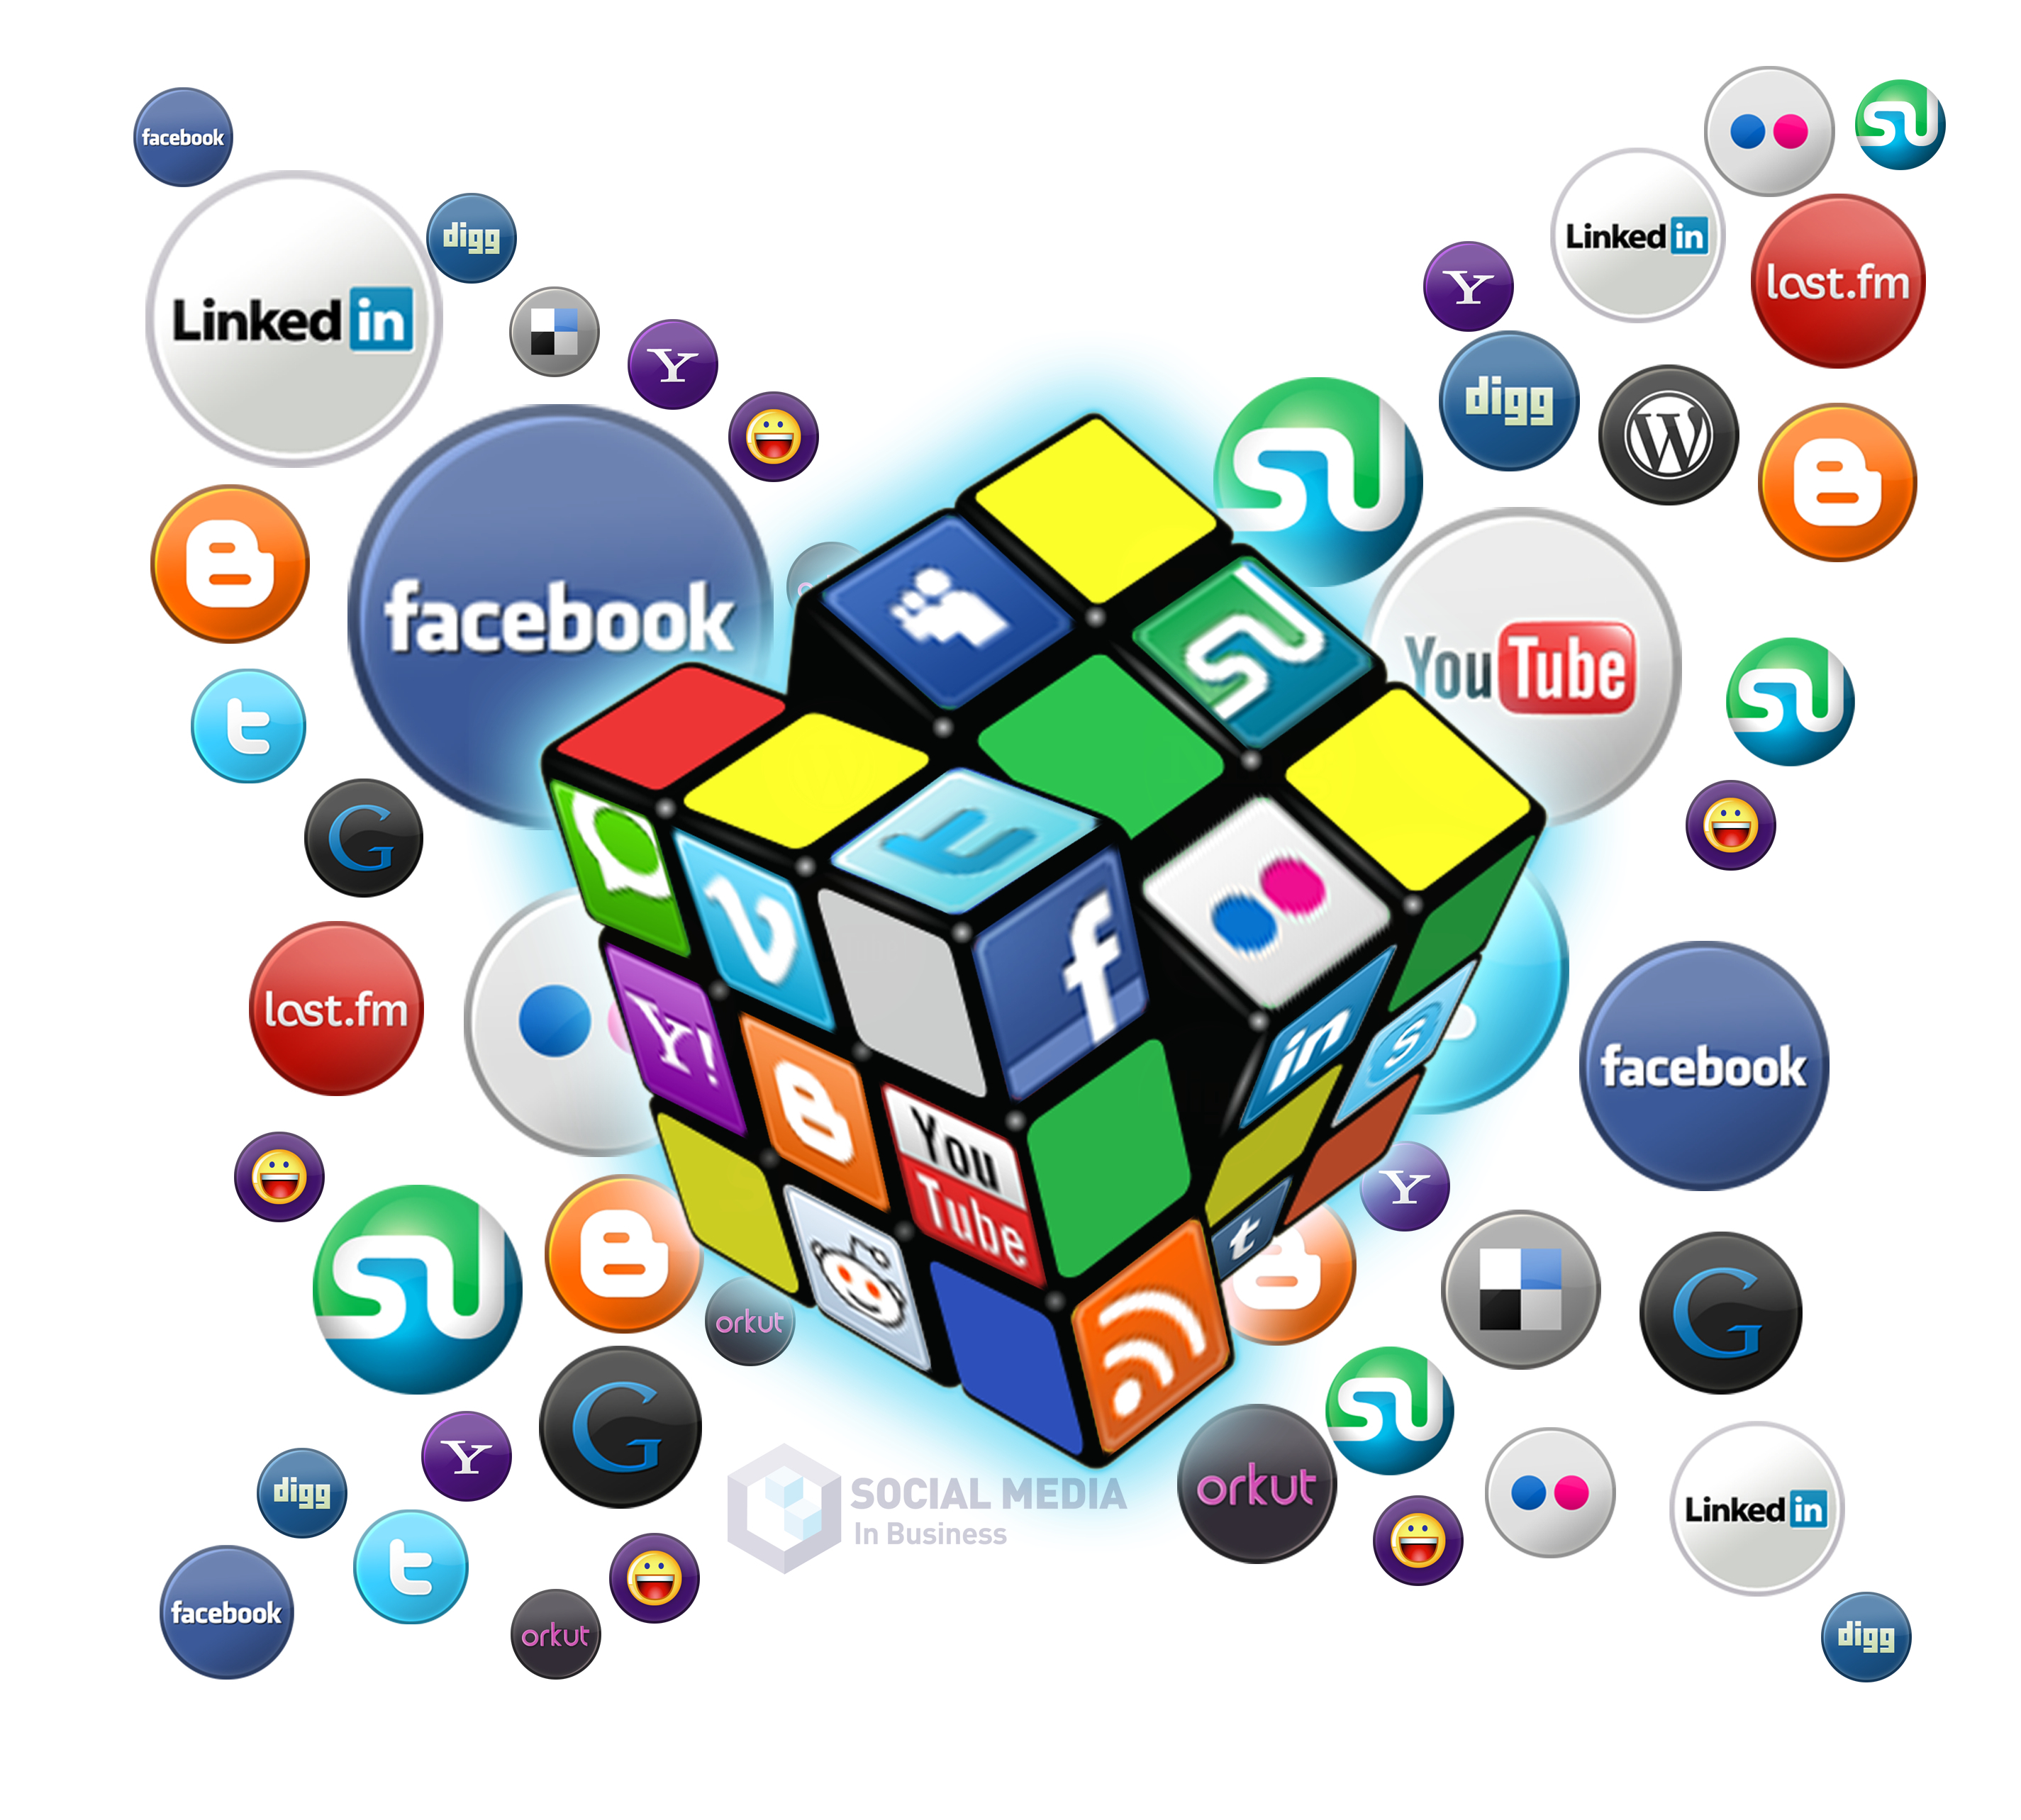 Three Things That All Social Networks Have In Common - Business 2 Community